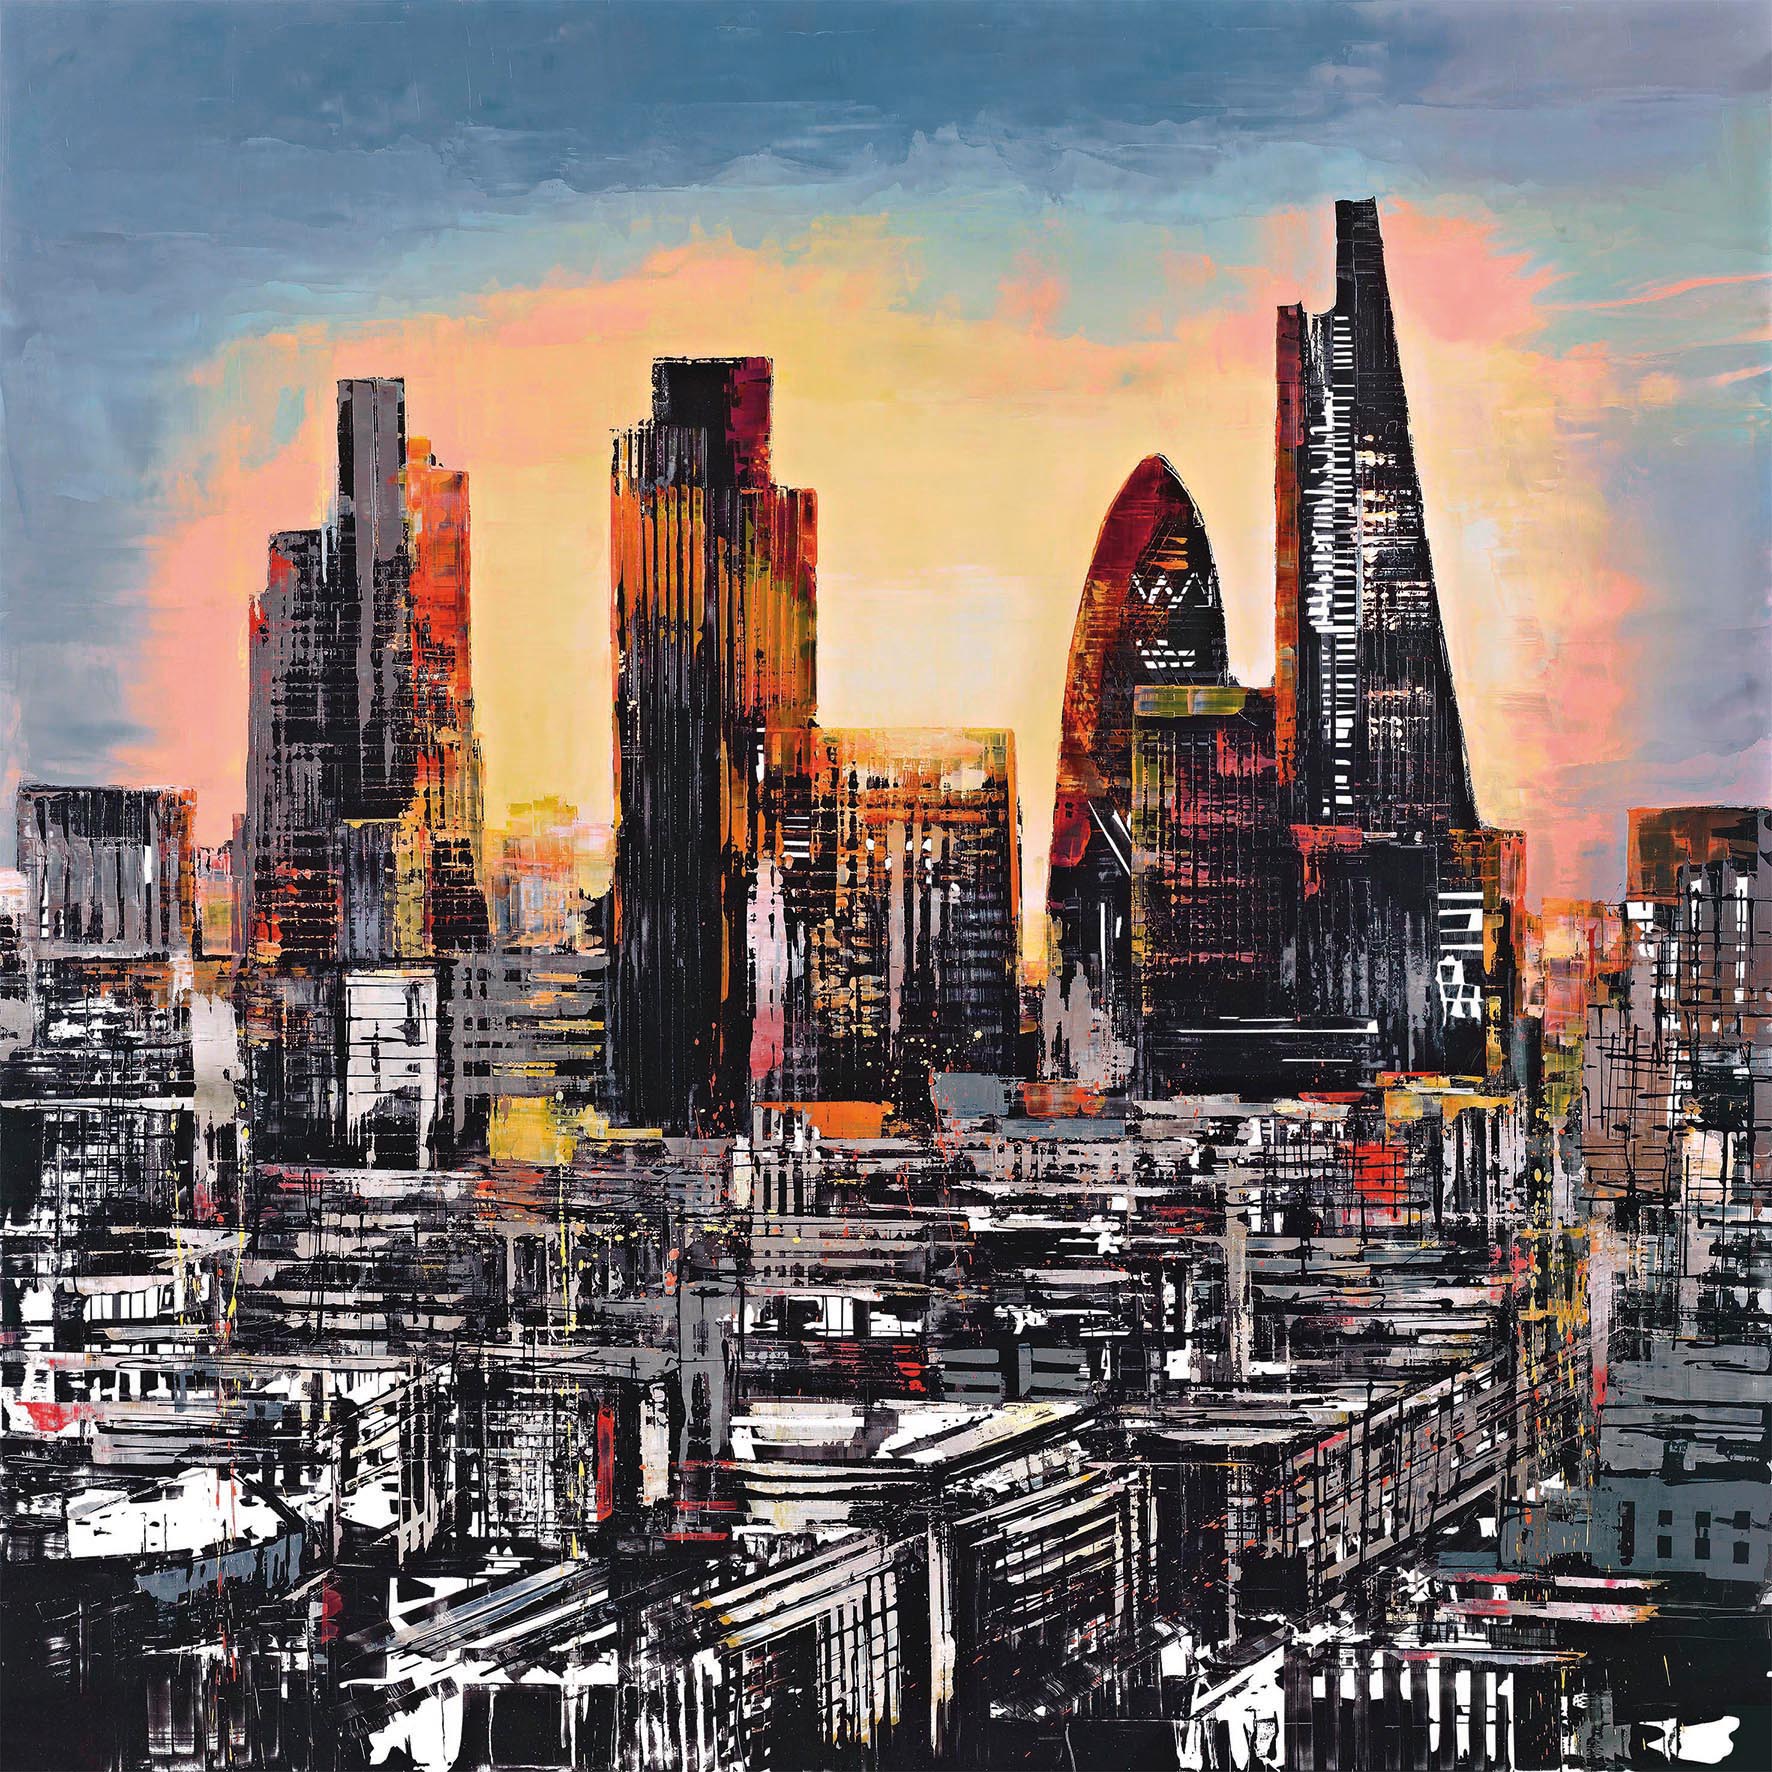 City Burst by Paul Kenton, UK contemporary cityscape artist, a limited edition print from his London Collection